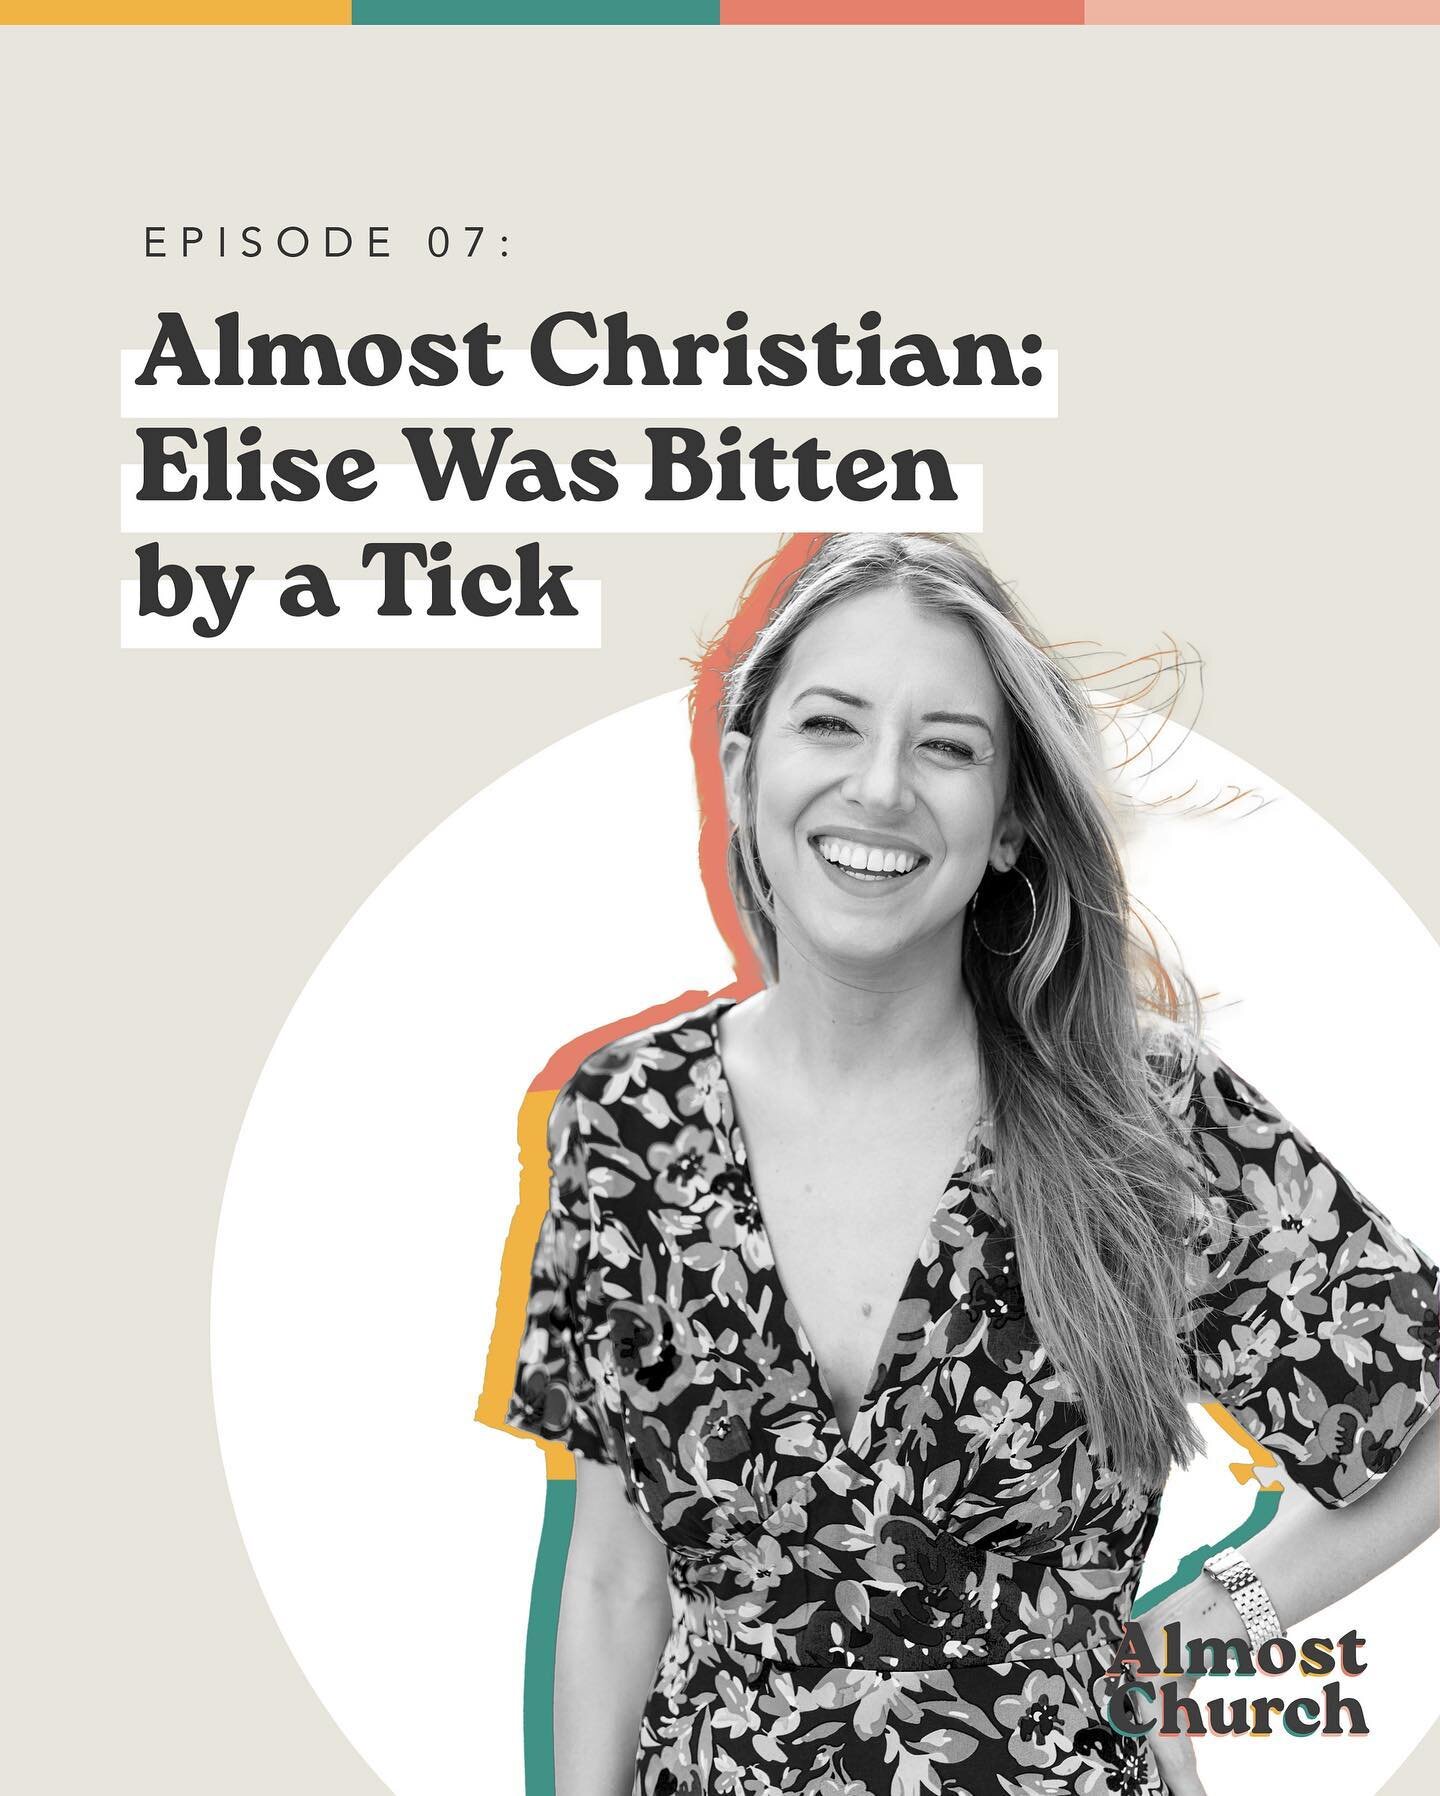 New episode!  How a tick bite in Central Park on the first day of Spring can change your whole view of faith.

Thank you, Elise, for sharing your story! So so good. #almostchurch